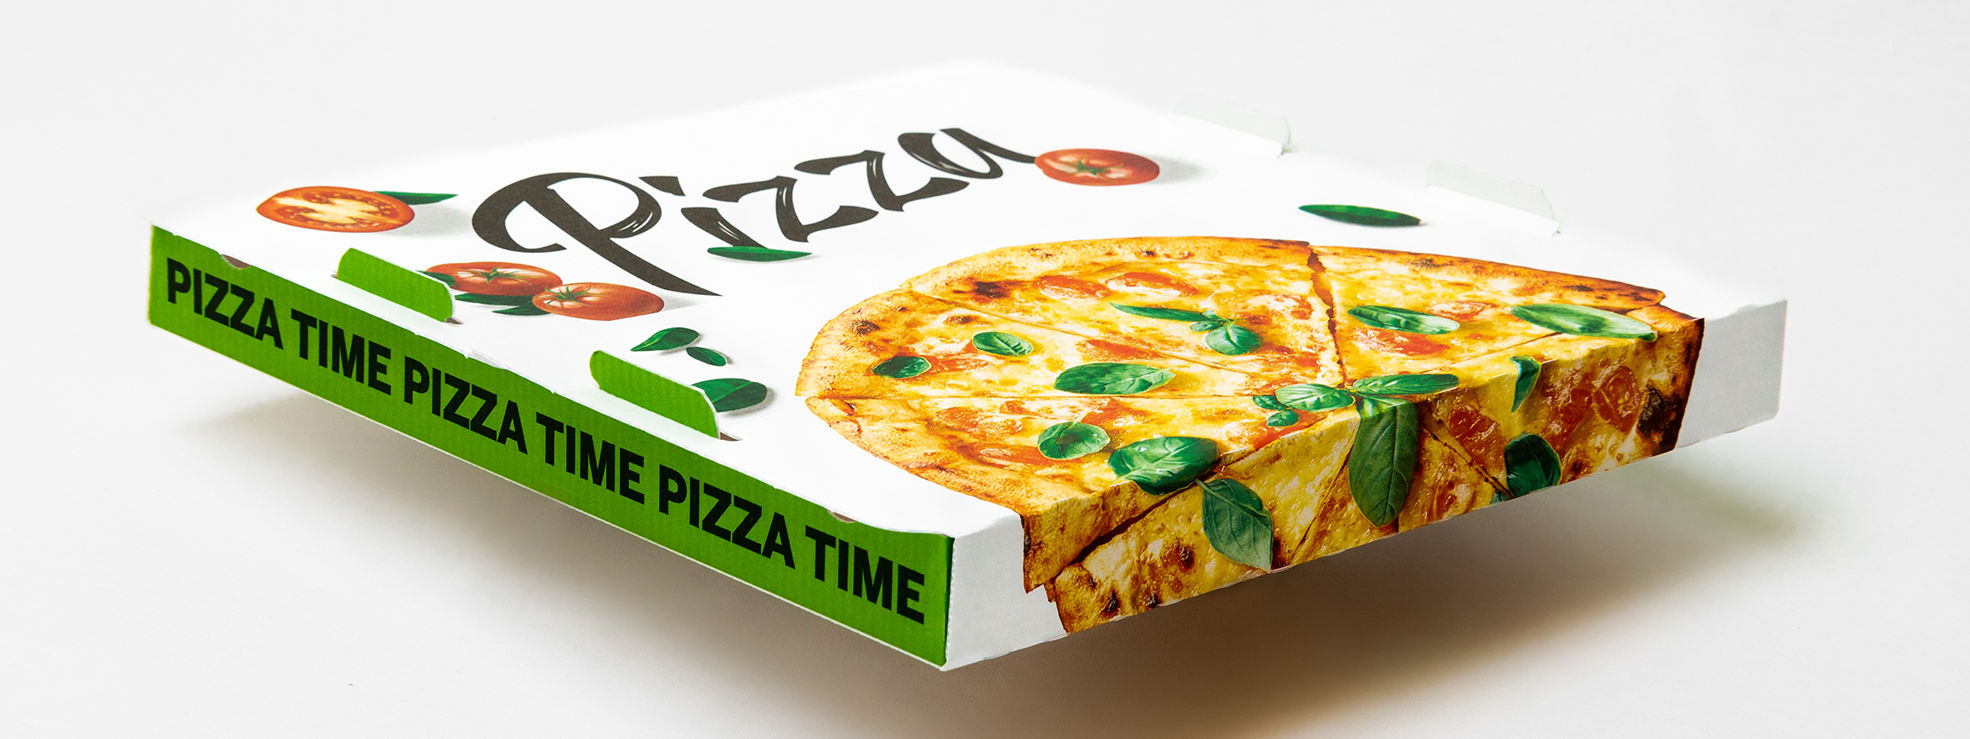 Metsä Board collaborates with industry experts to create the world's  lightest pizza box